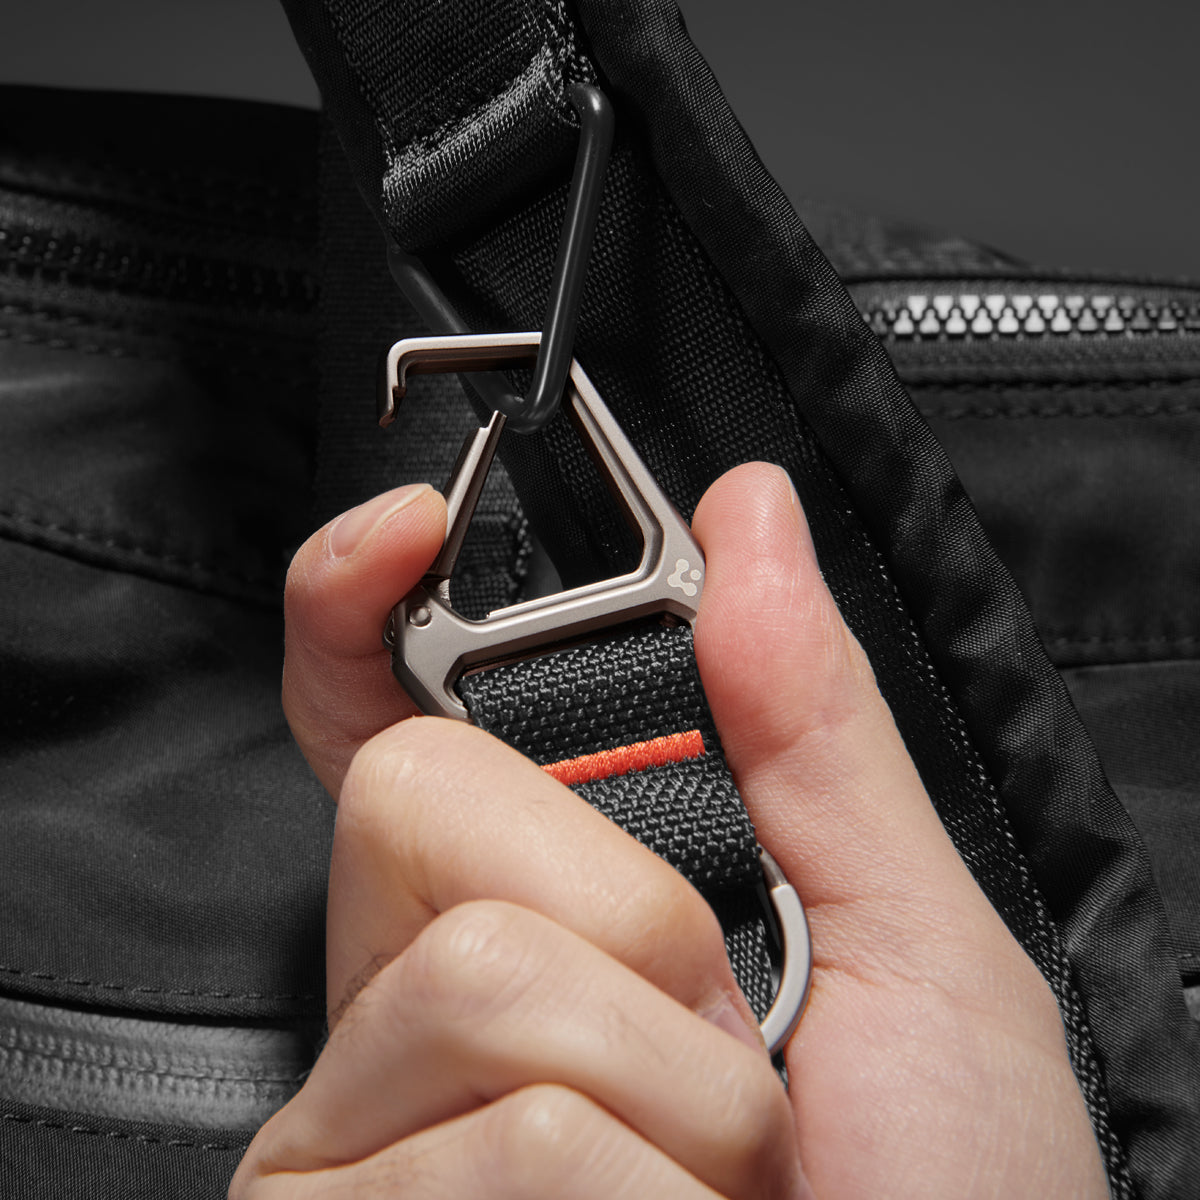 AHP05472 - Carabiner Black Strap + Key Ring showing the carabiner being hooked onto backpack strap